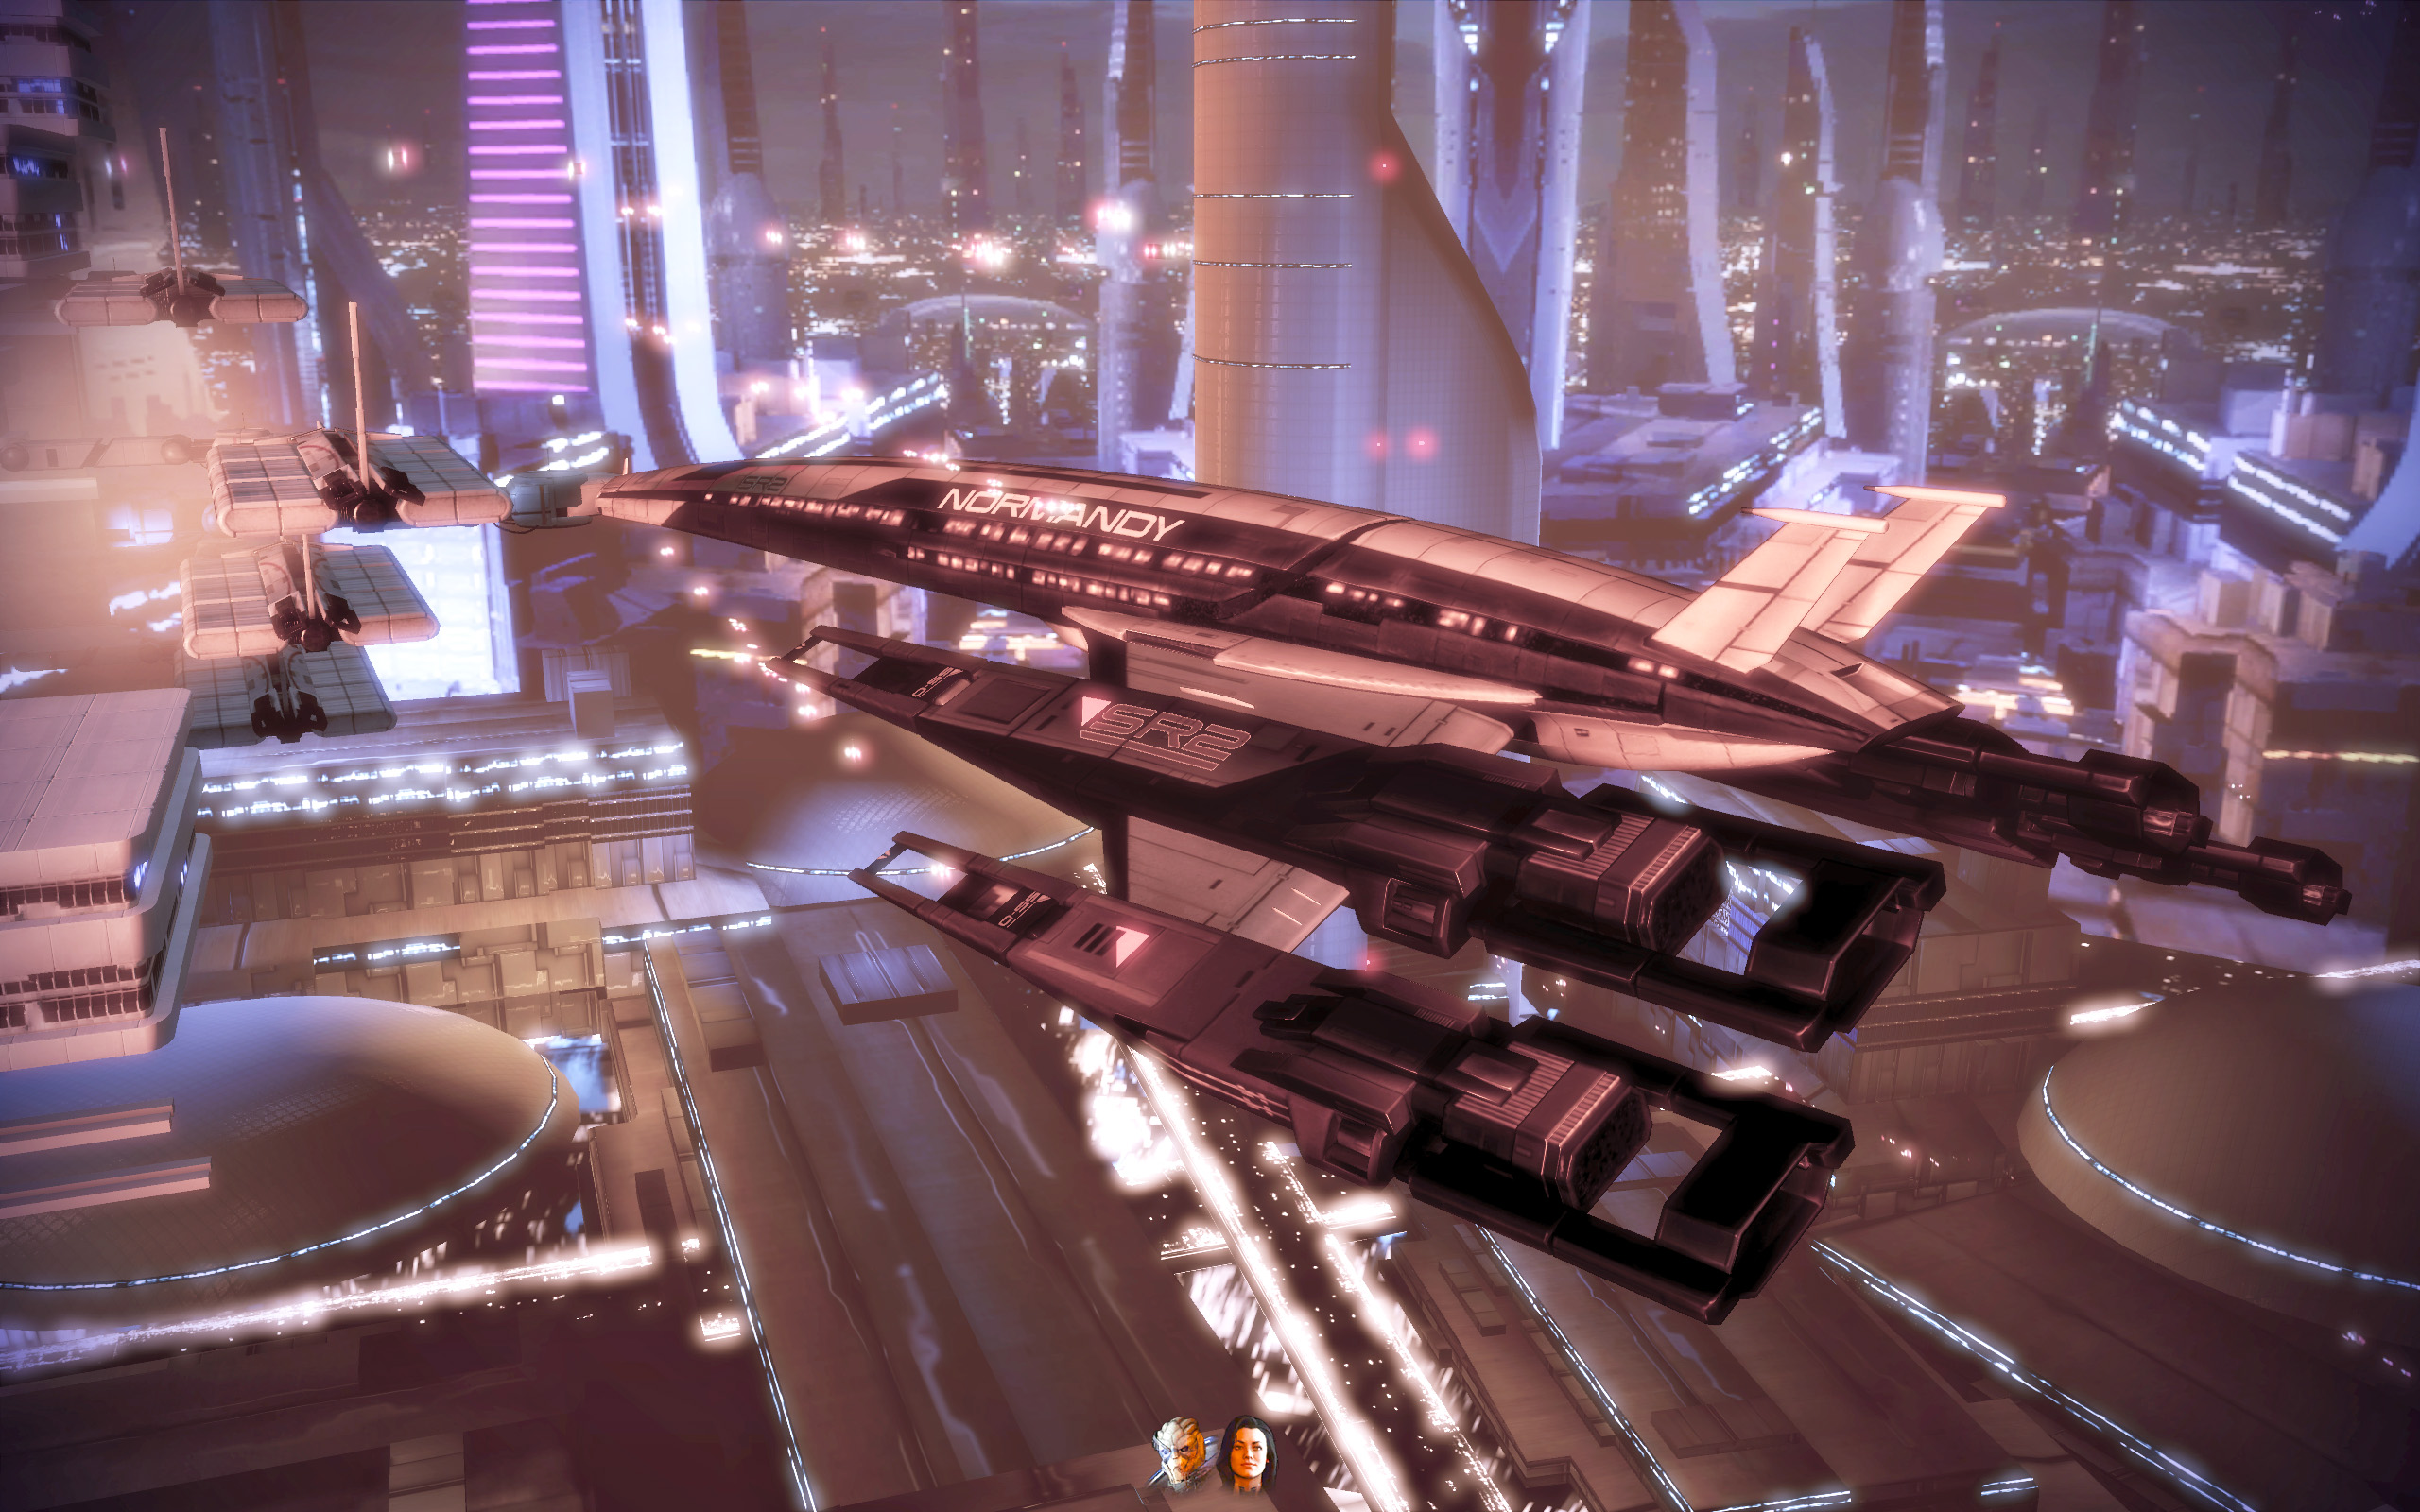 Normandy SR-2 spaceship from Mass Effect 2 video game.